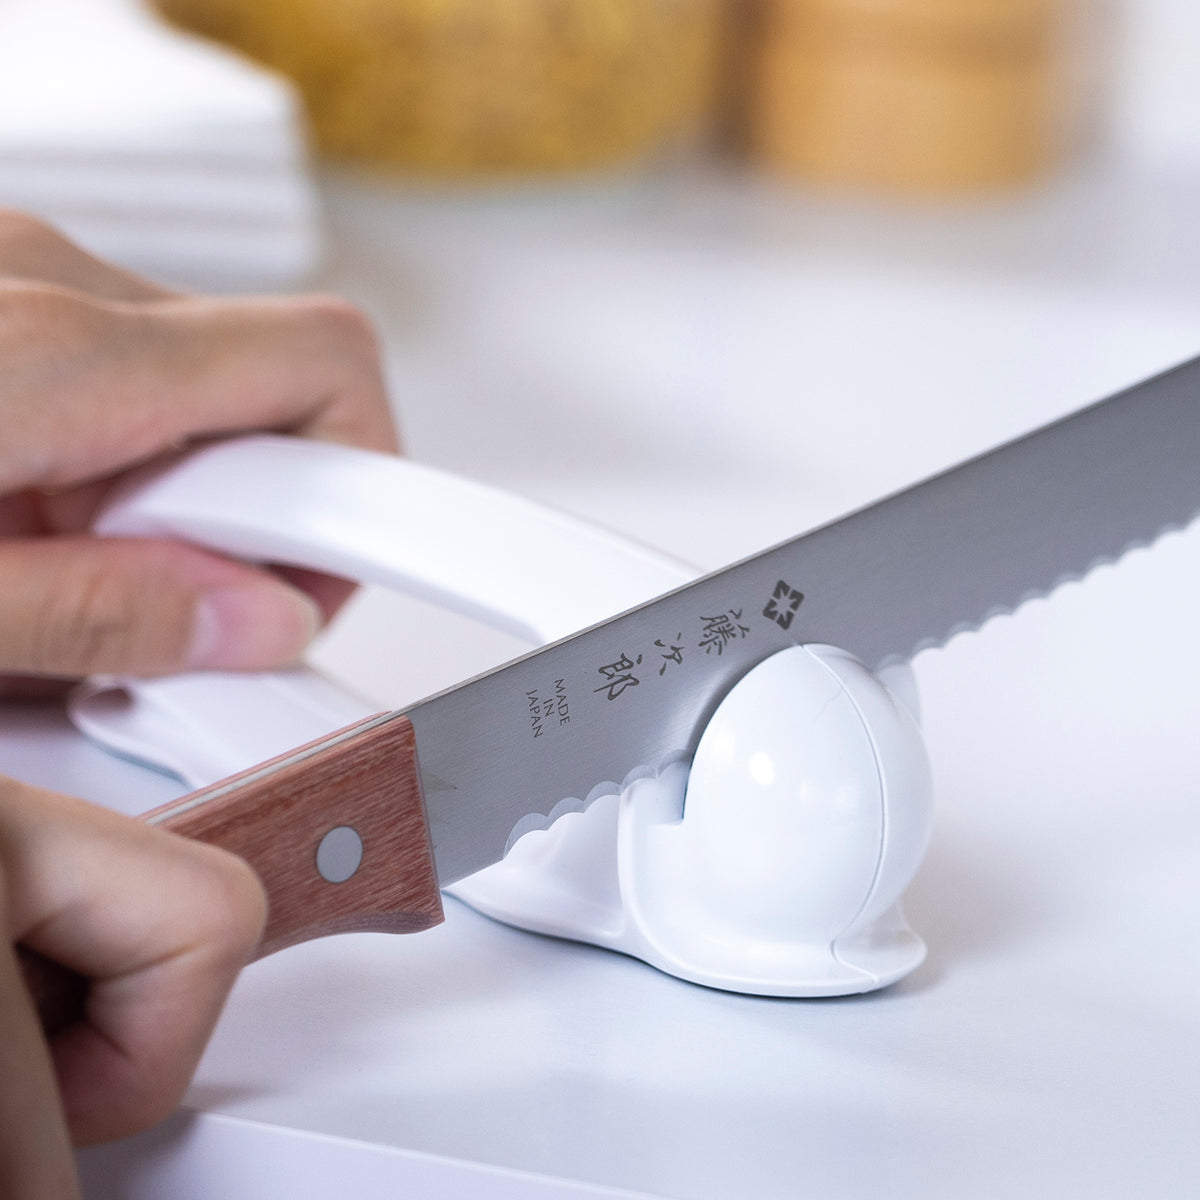 How to Pick the Best Knife Sharpener for Serrated Knives